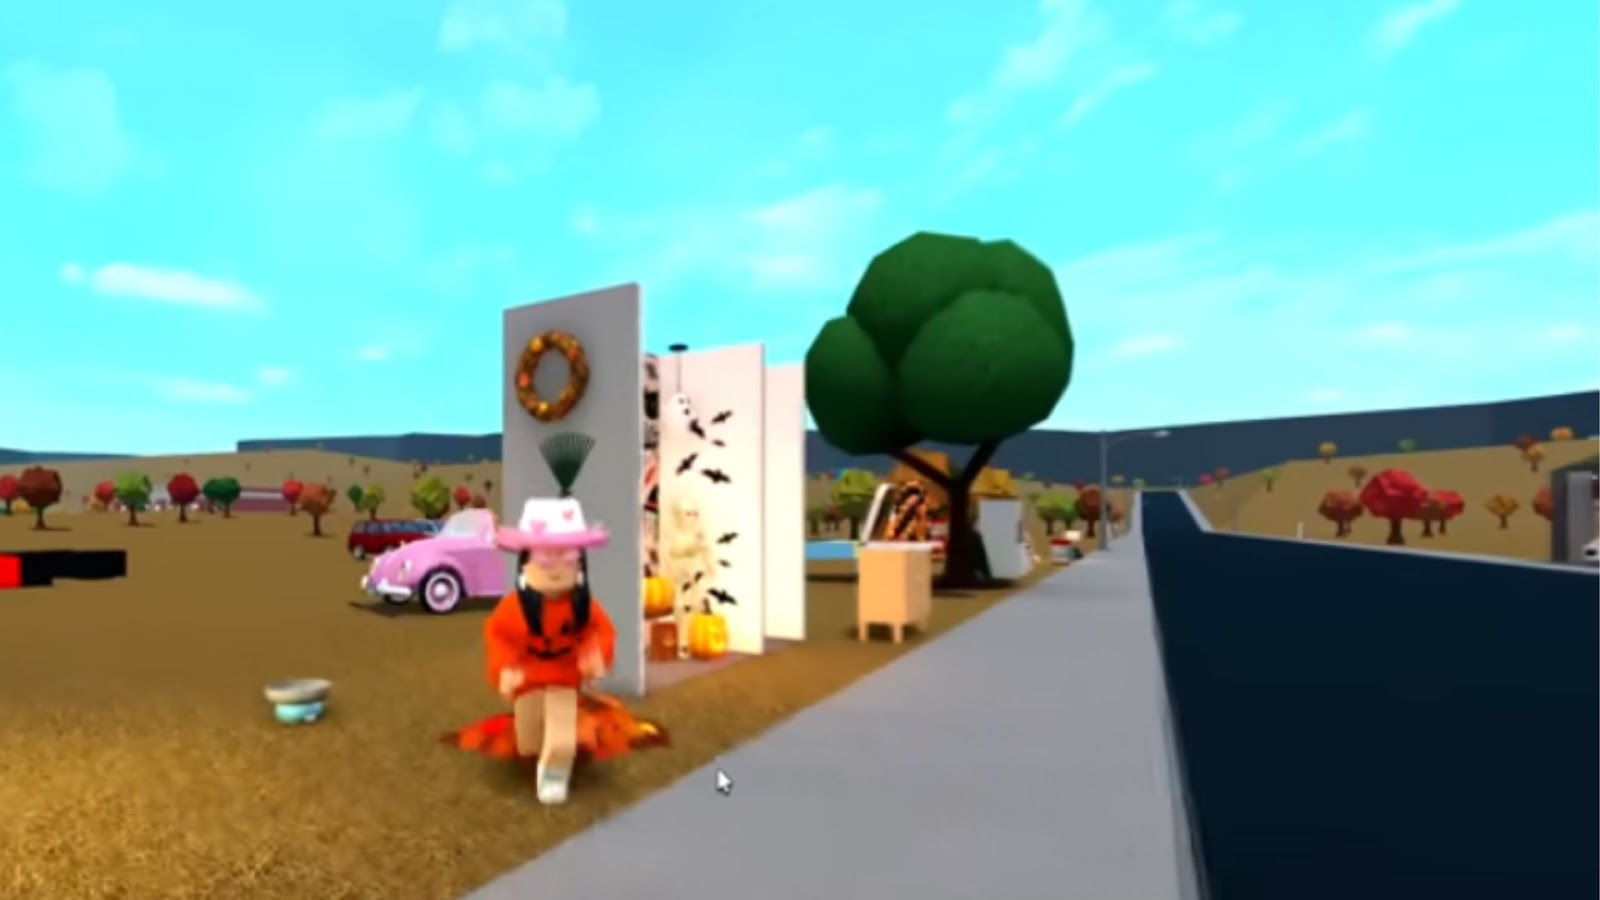 BLOXBURG FALL/HALLOWEEN UPDATE THINGS TO EXPECT THIS YEAR 